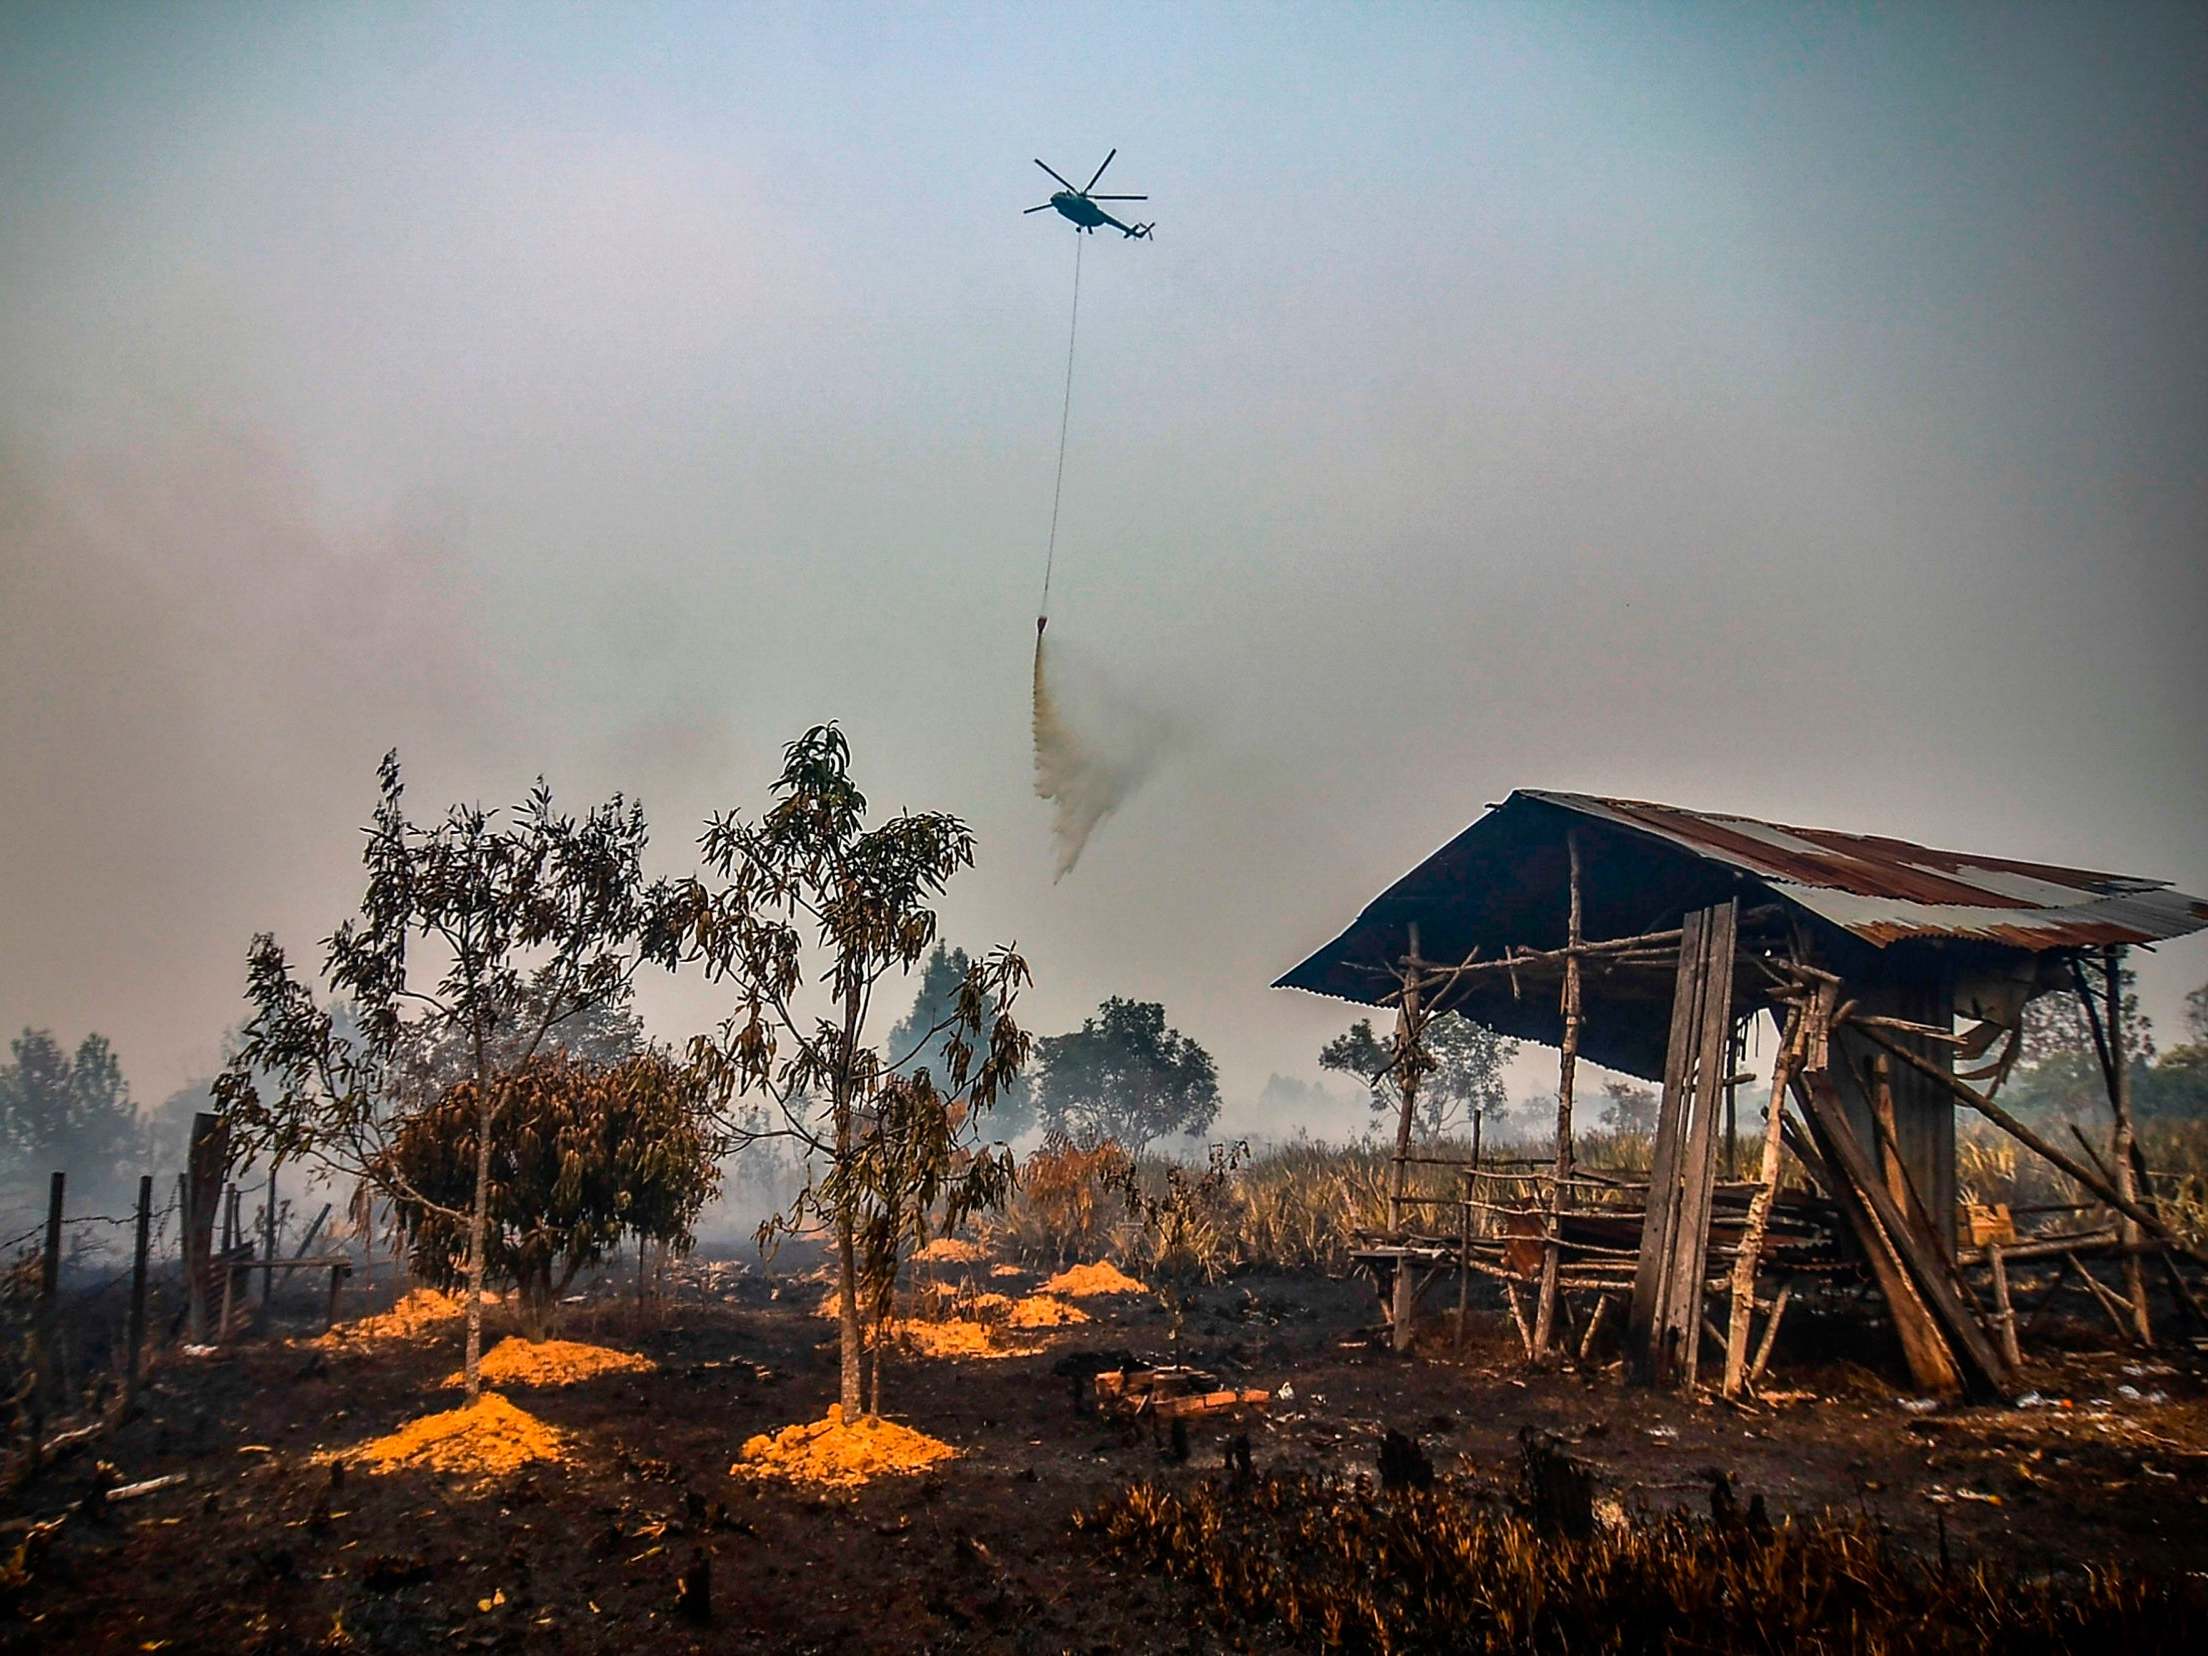 A water-bombing helicopter douses the burning peatland in Kampar of Riau province on 18 September 2019.